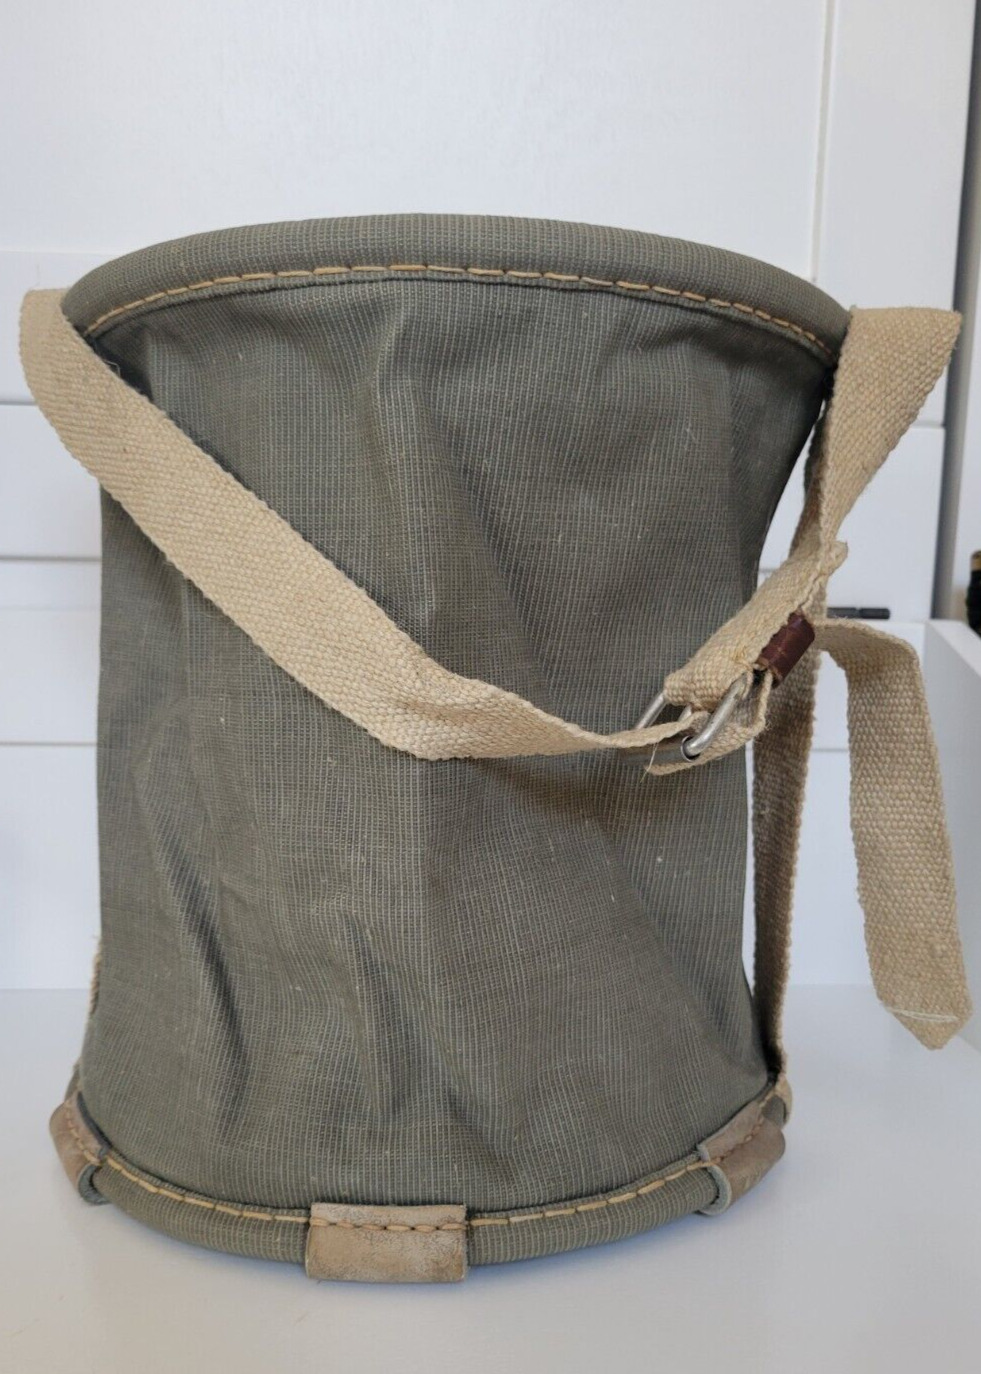 Vintage WWII Military Army Canvas Water Bucket Hasle bei Burgdorf 1943